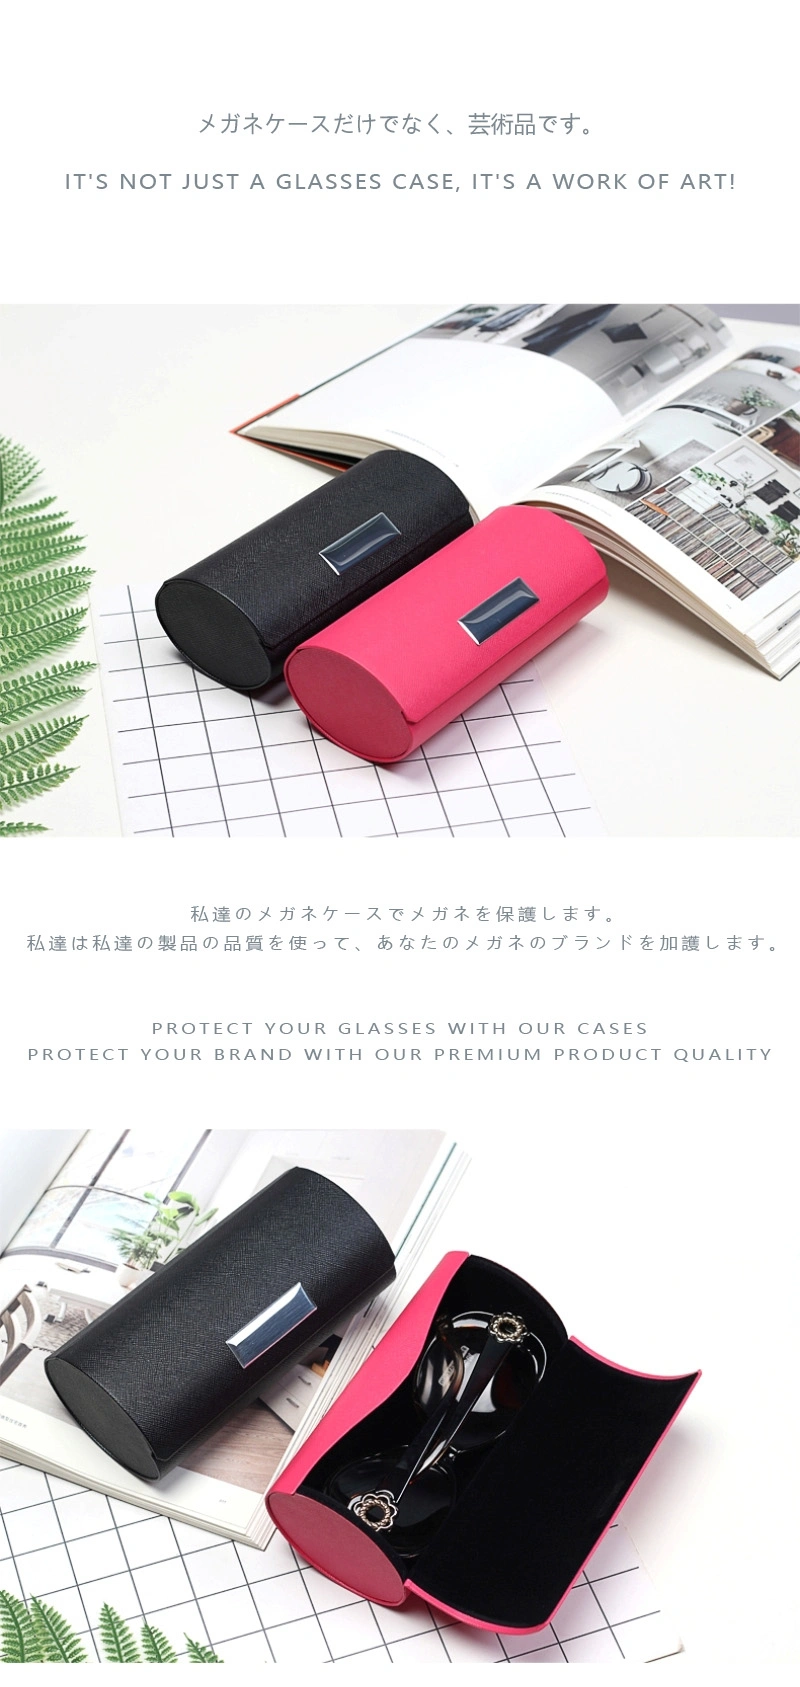 Hard Shell Optical Case for Reading Glasses and Sunglasses; Durable and Lightweight Protective Eyeglasses Case